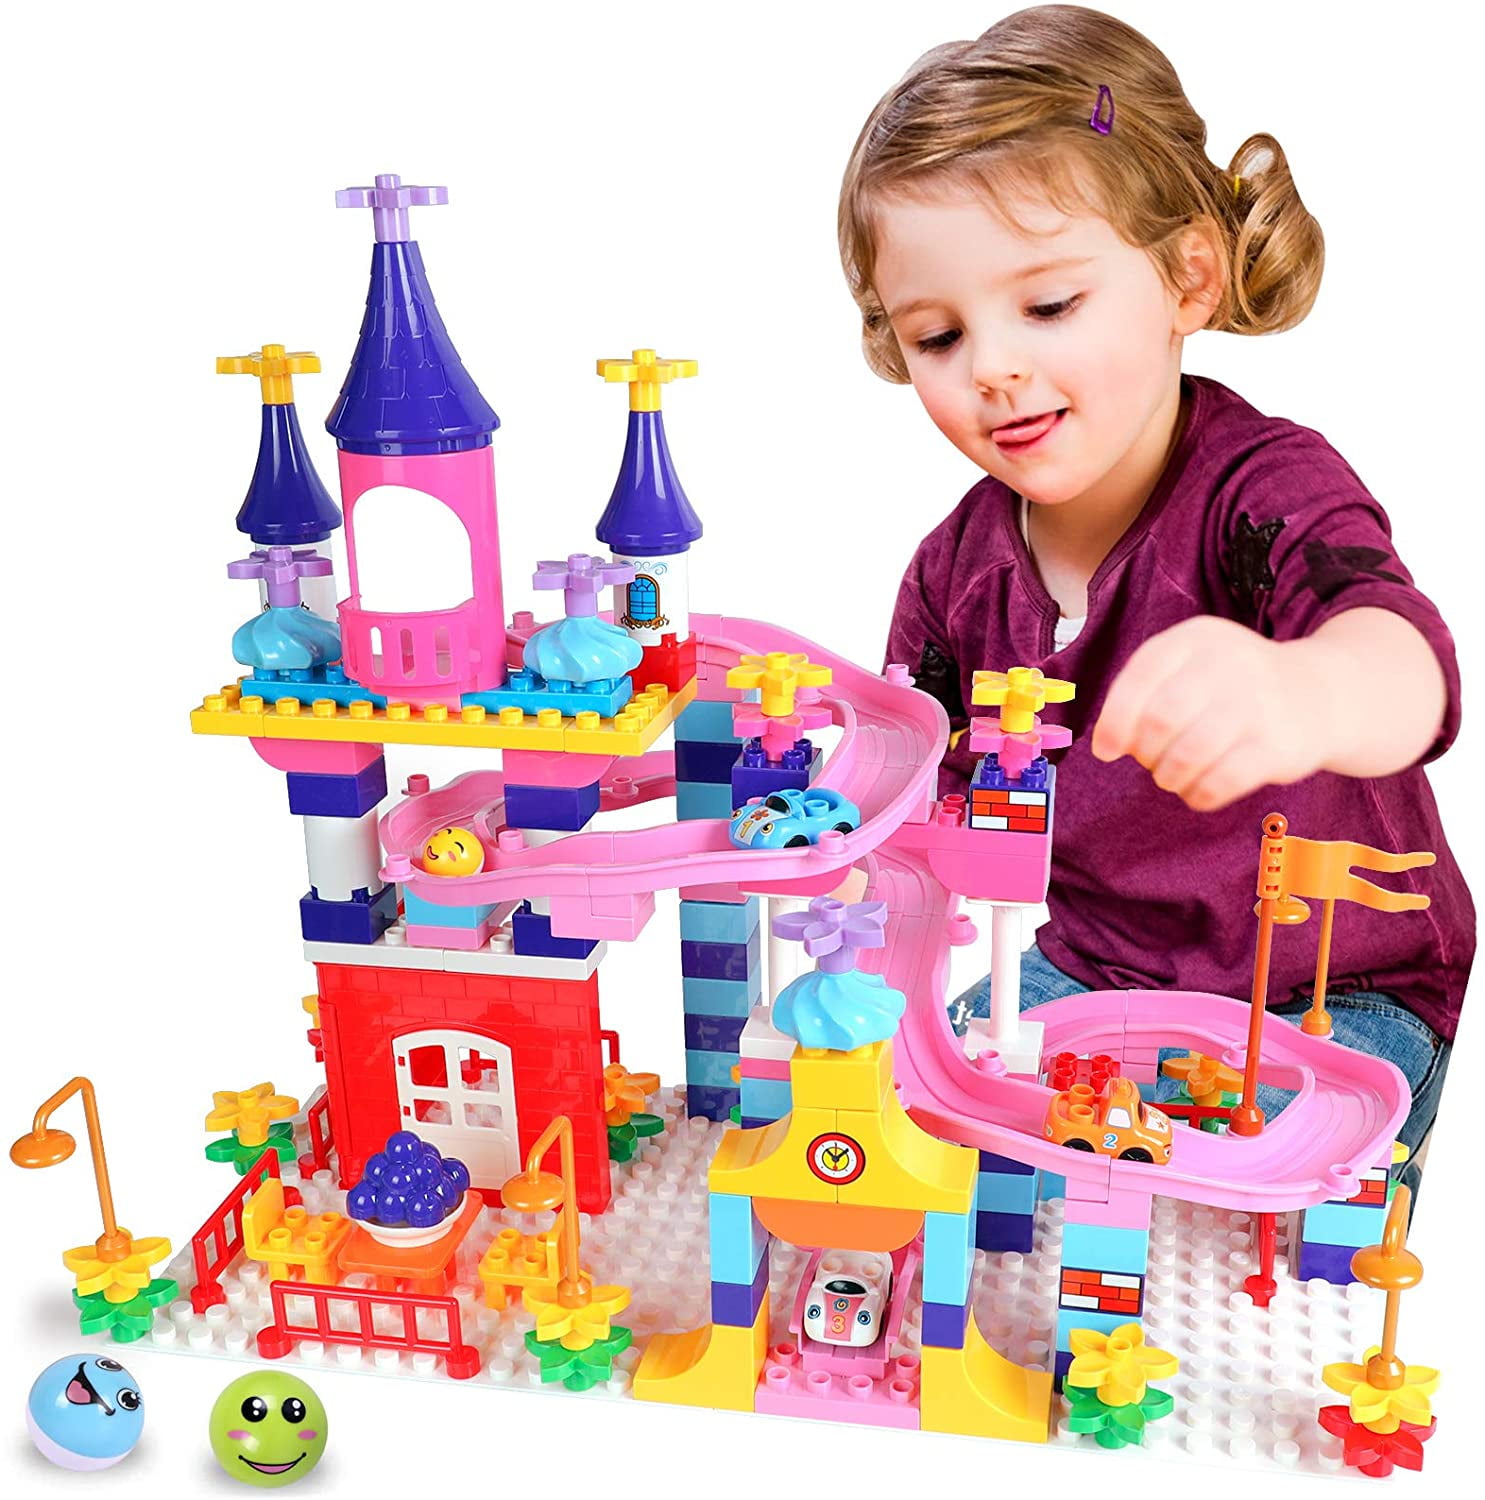 100pcs Building Blocks Slide Learning Table Creative Fun Educational Toy For Kid 